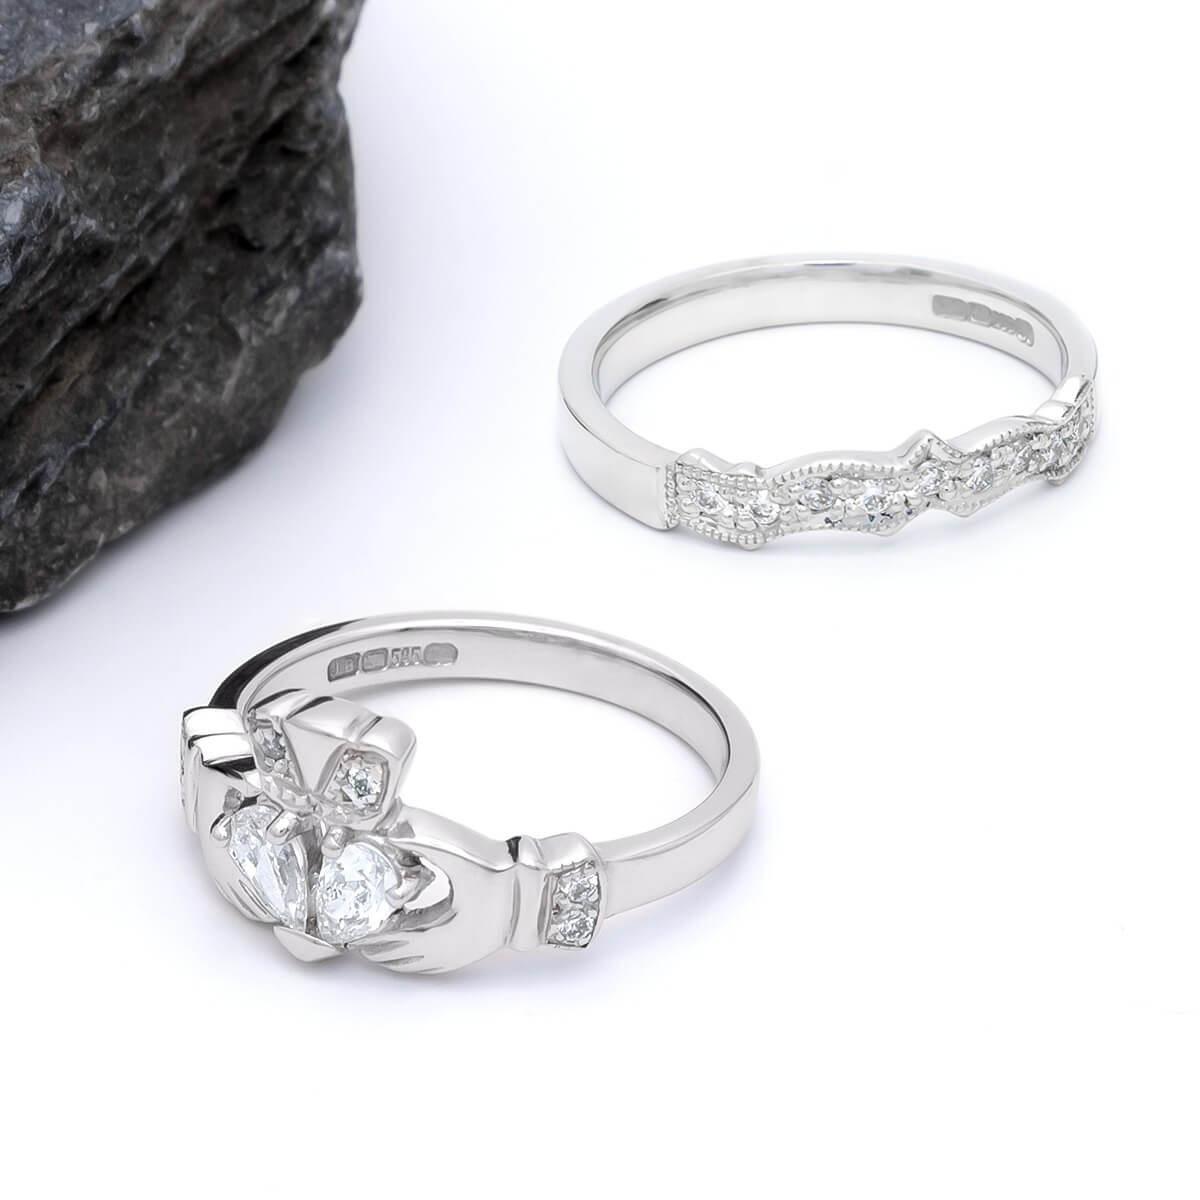 White Gold Claddagh Engagement Ring Set With Split-Heart Diamond, Cent...